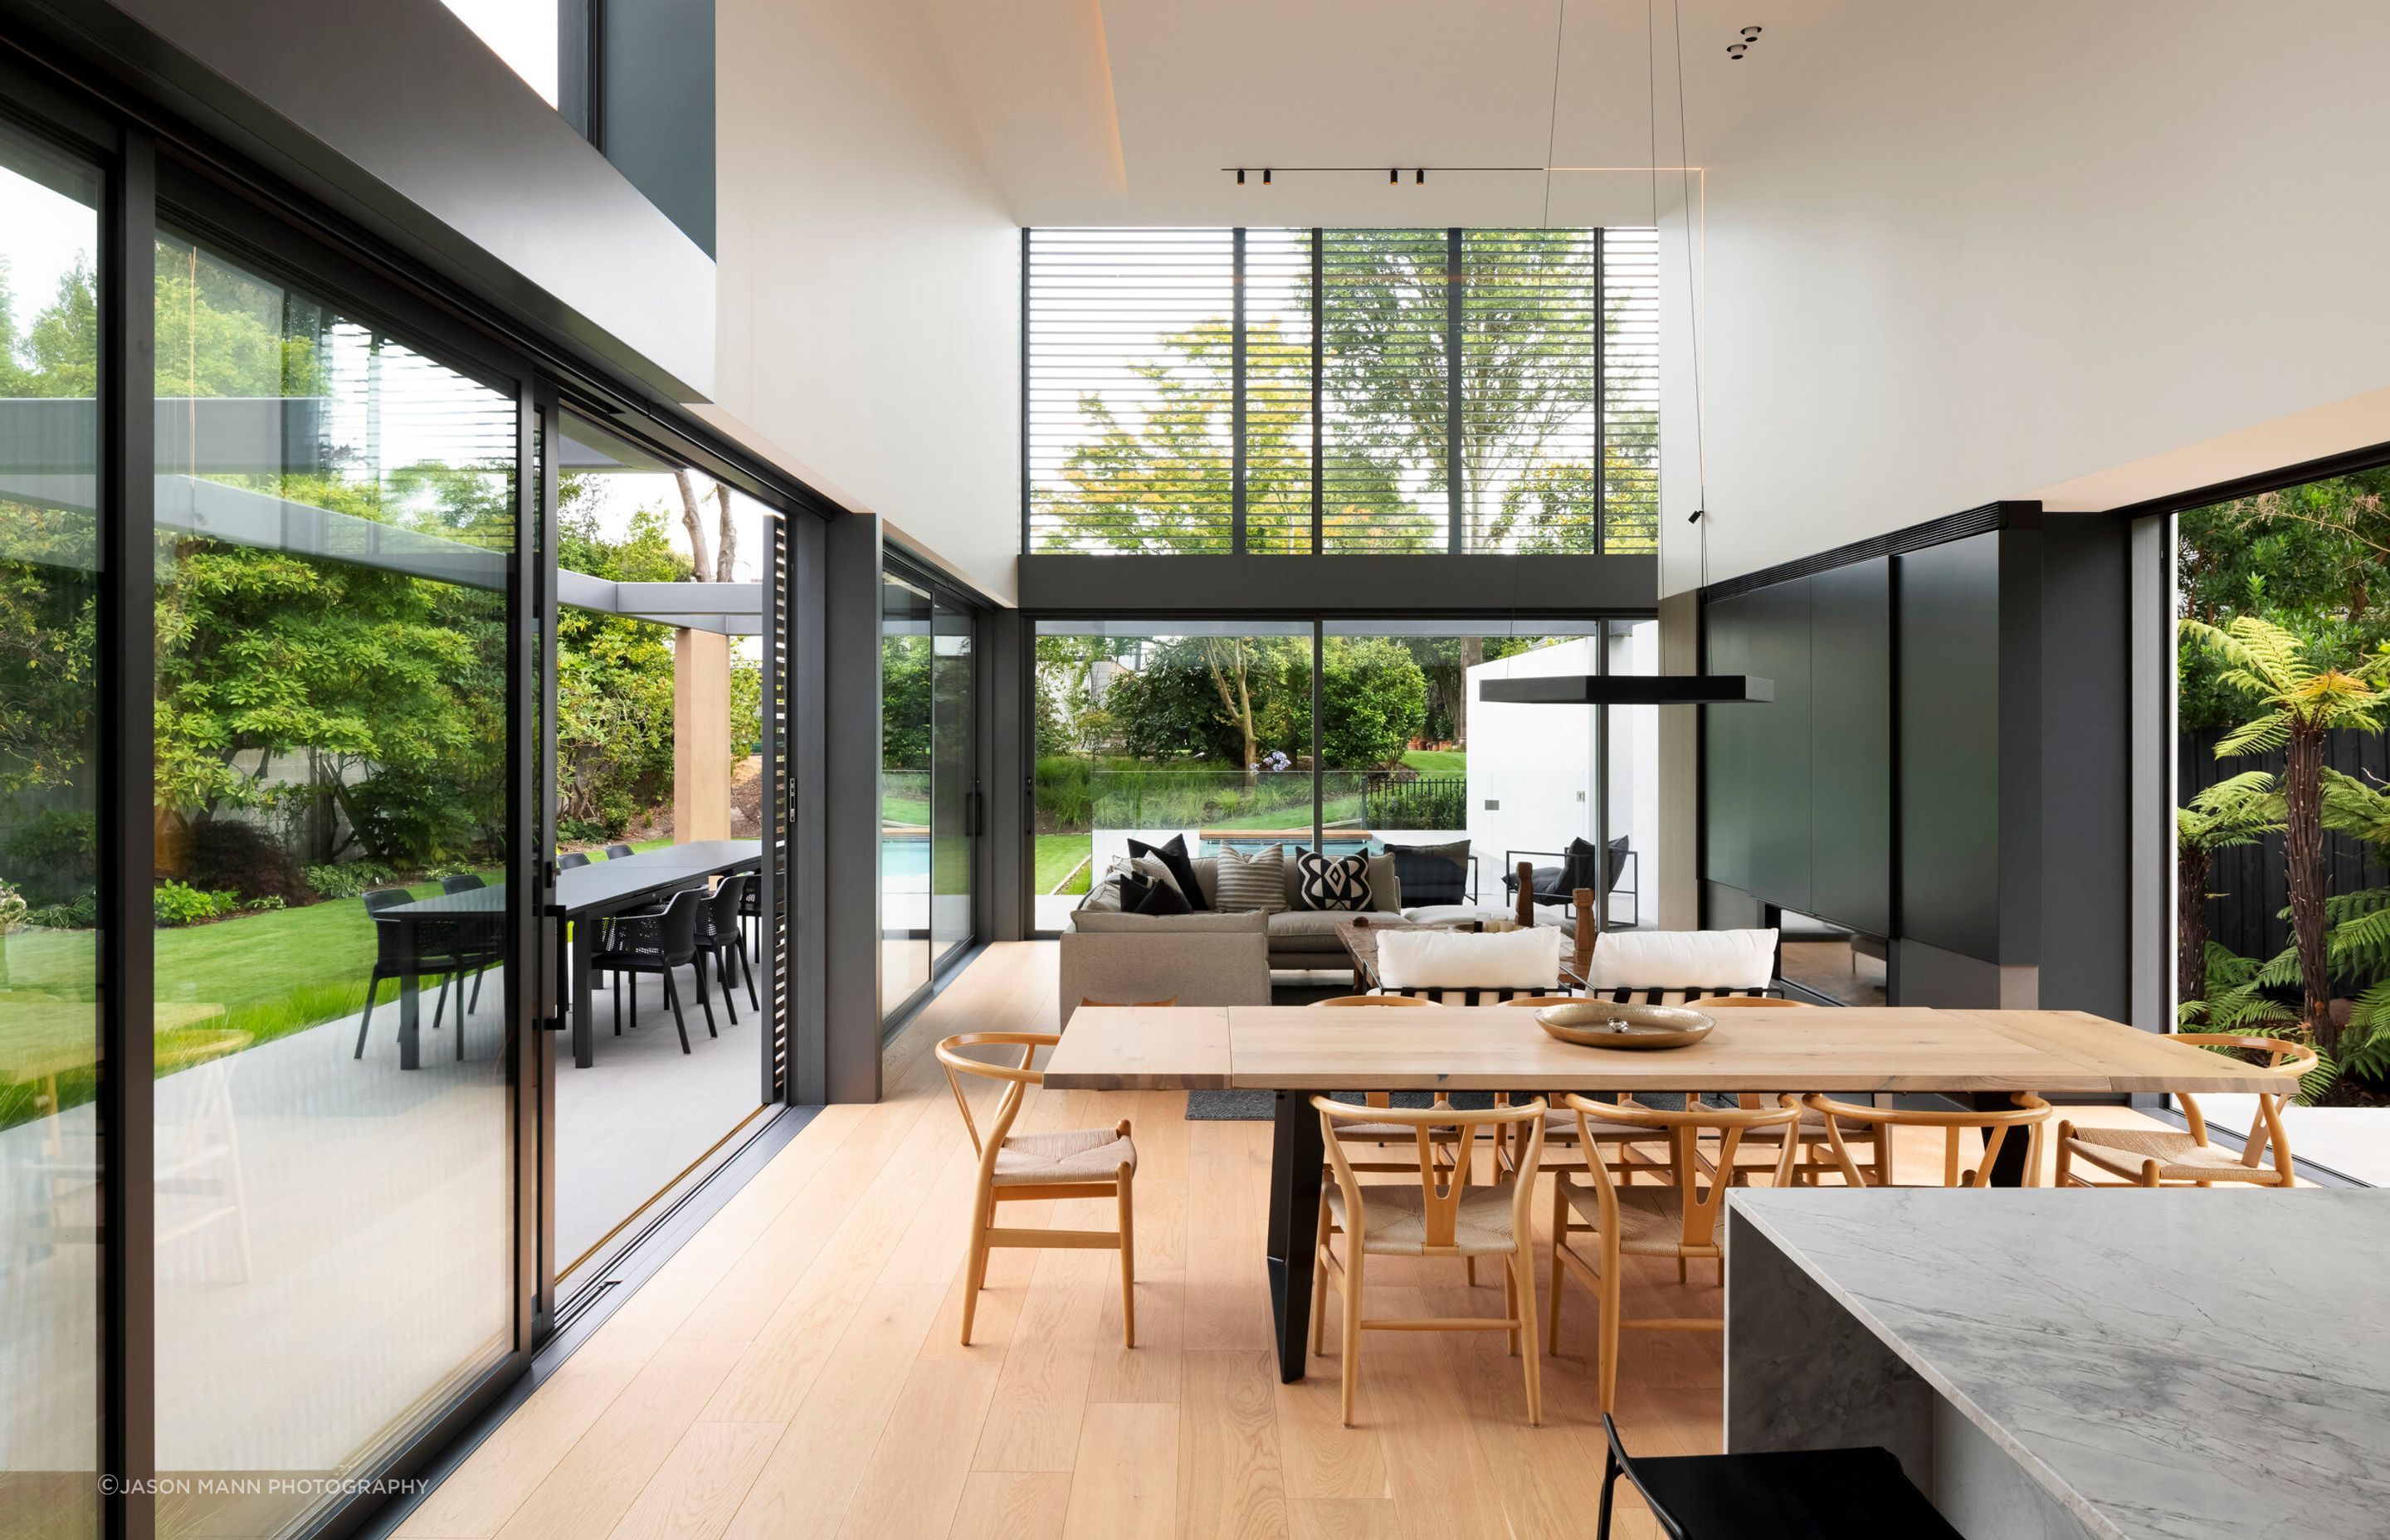 The first living area is an expansive, double-height space. The sightline naturally flows through the large sliding doors towards 180-degree views of the established garden and pool.